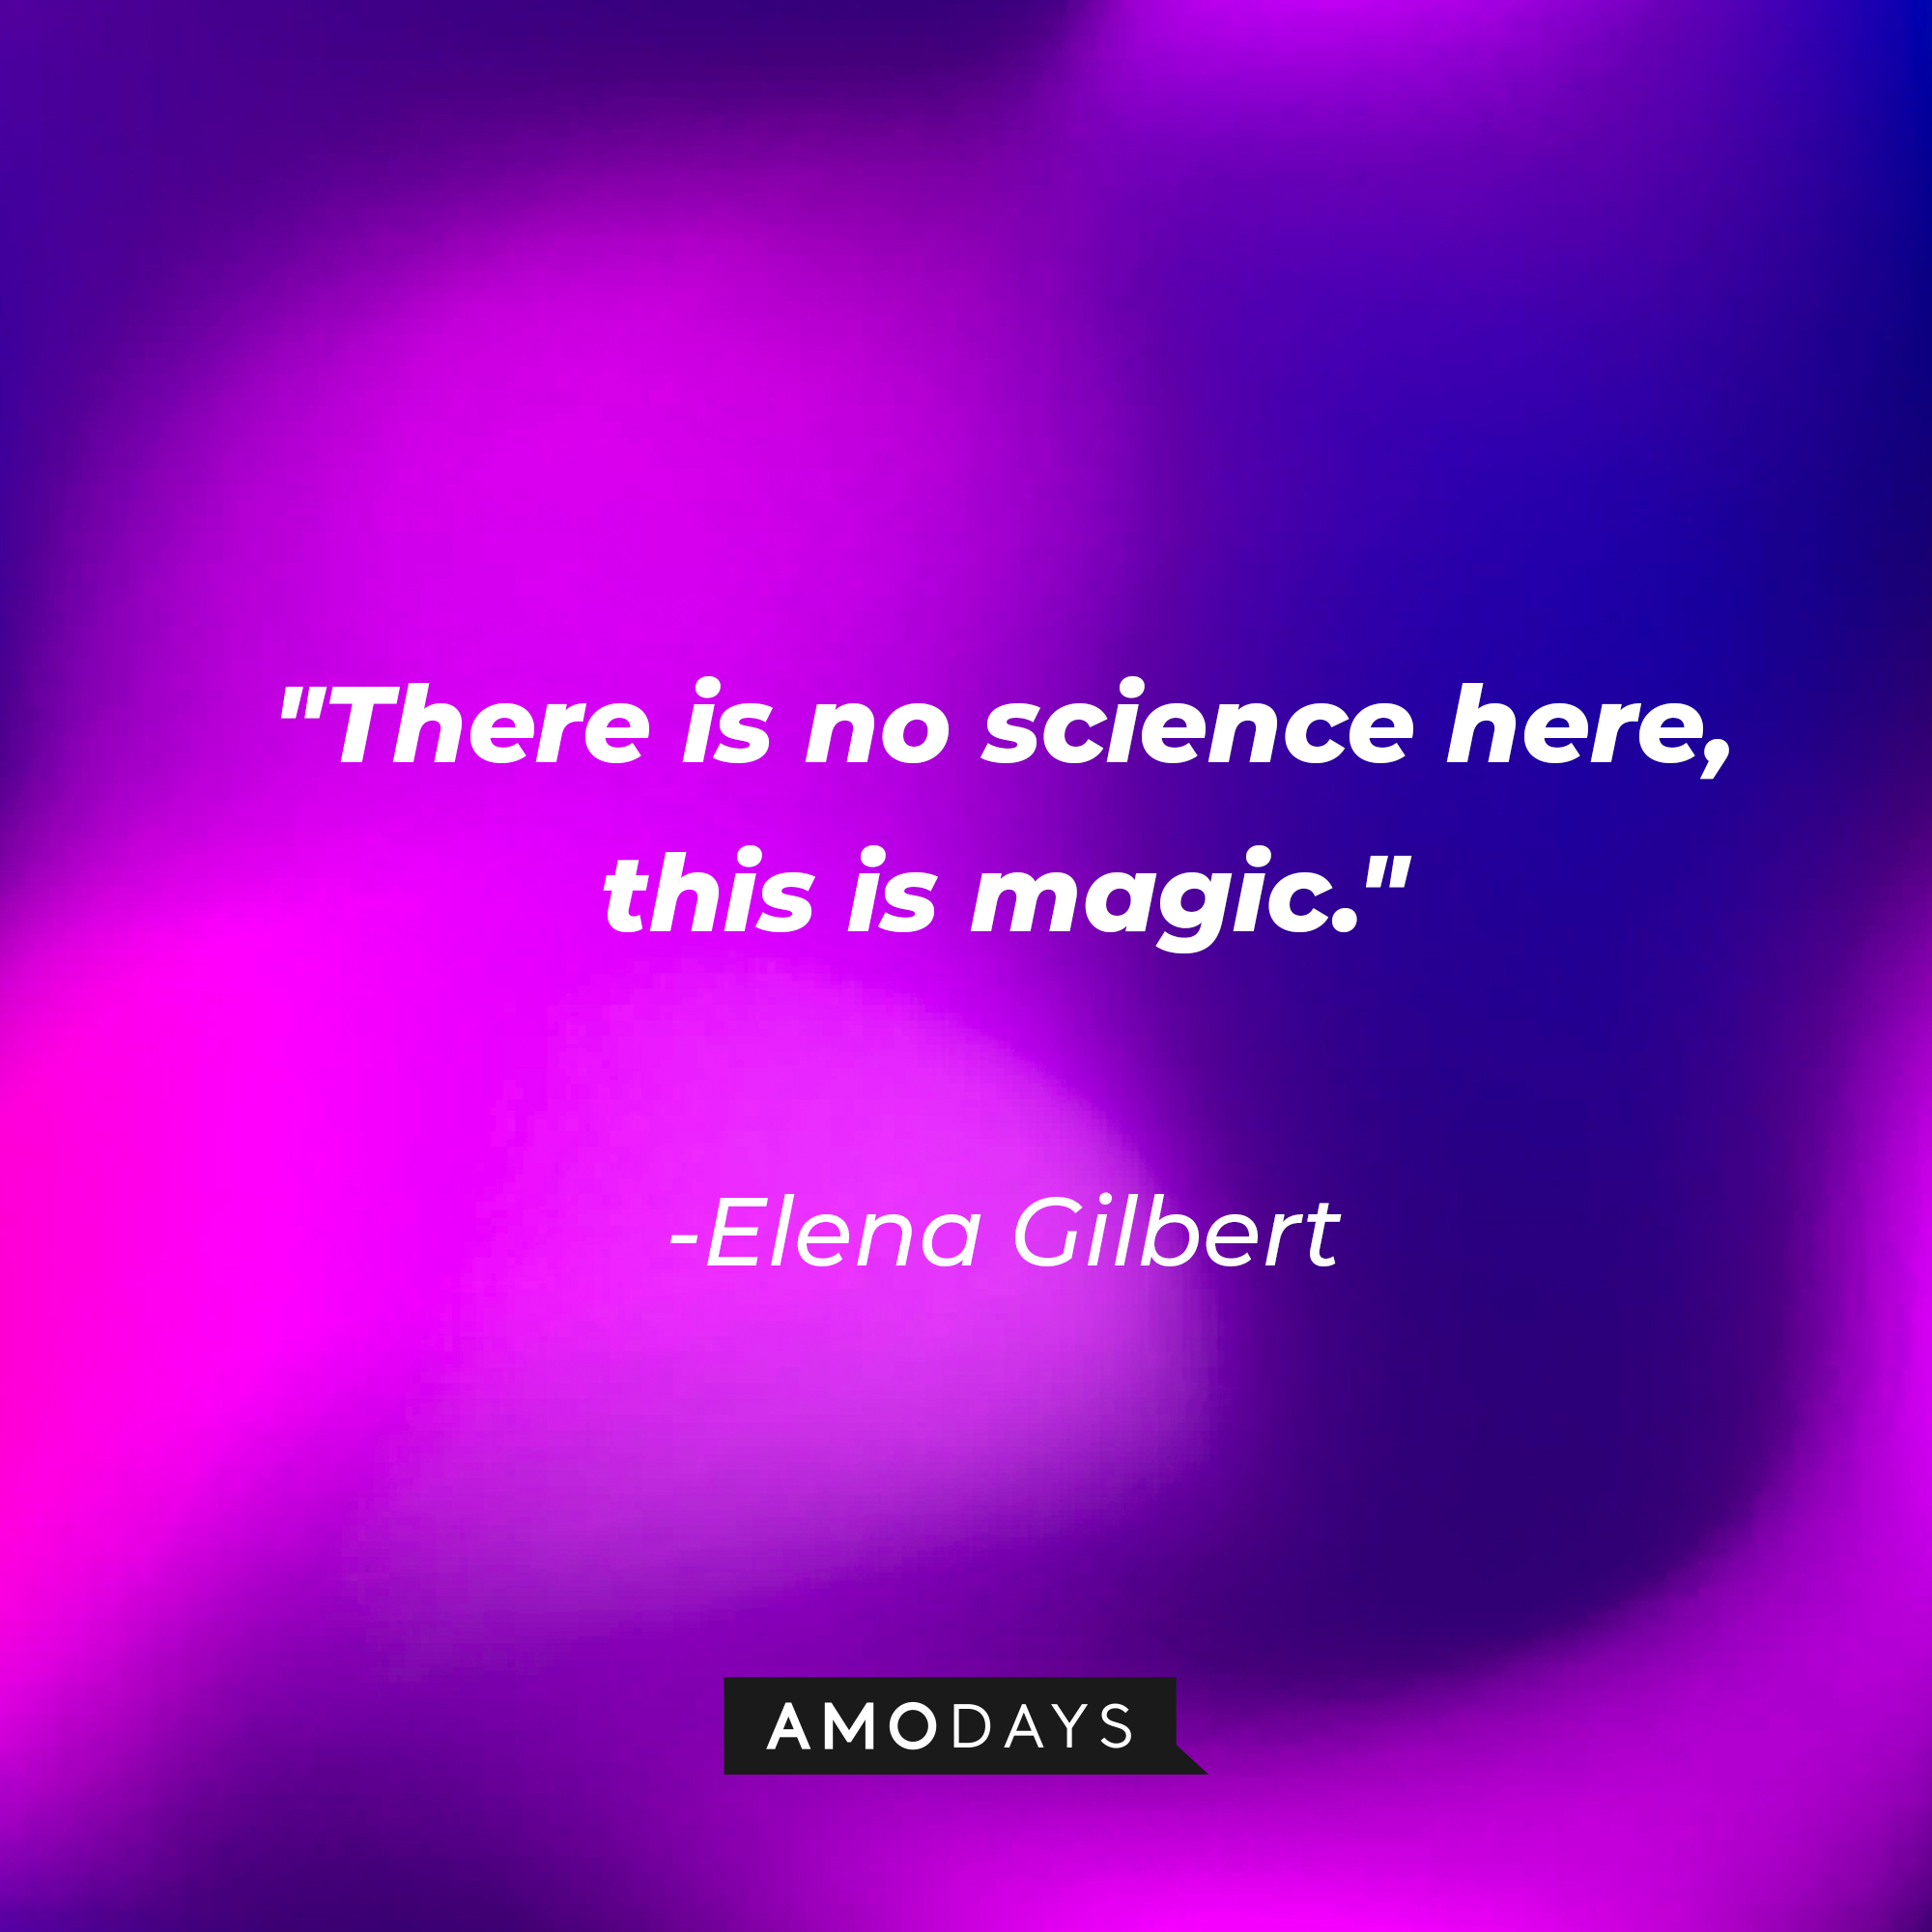 Elena Gilbert's quote: "There is no science here, this is magic." | Image: AmoDays